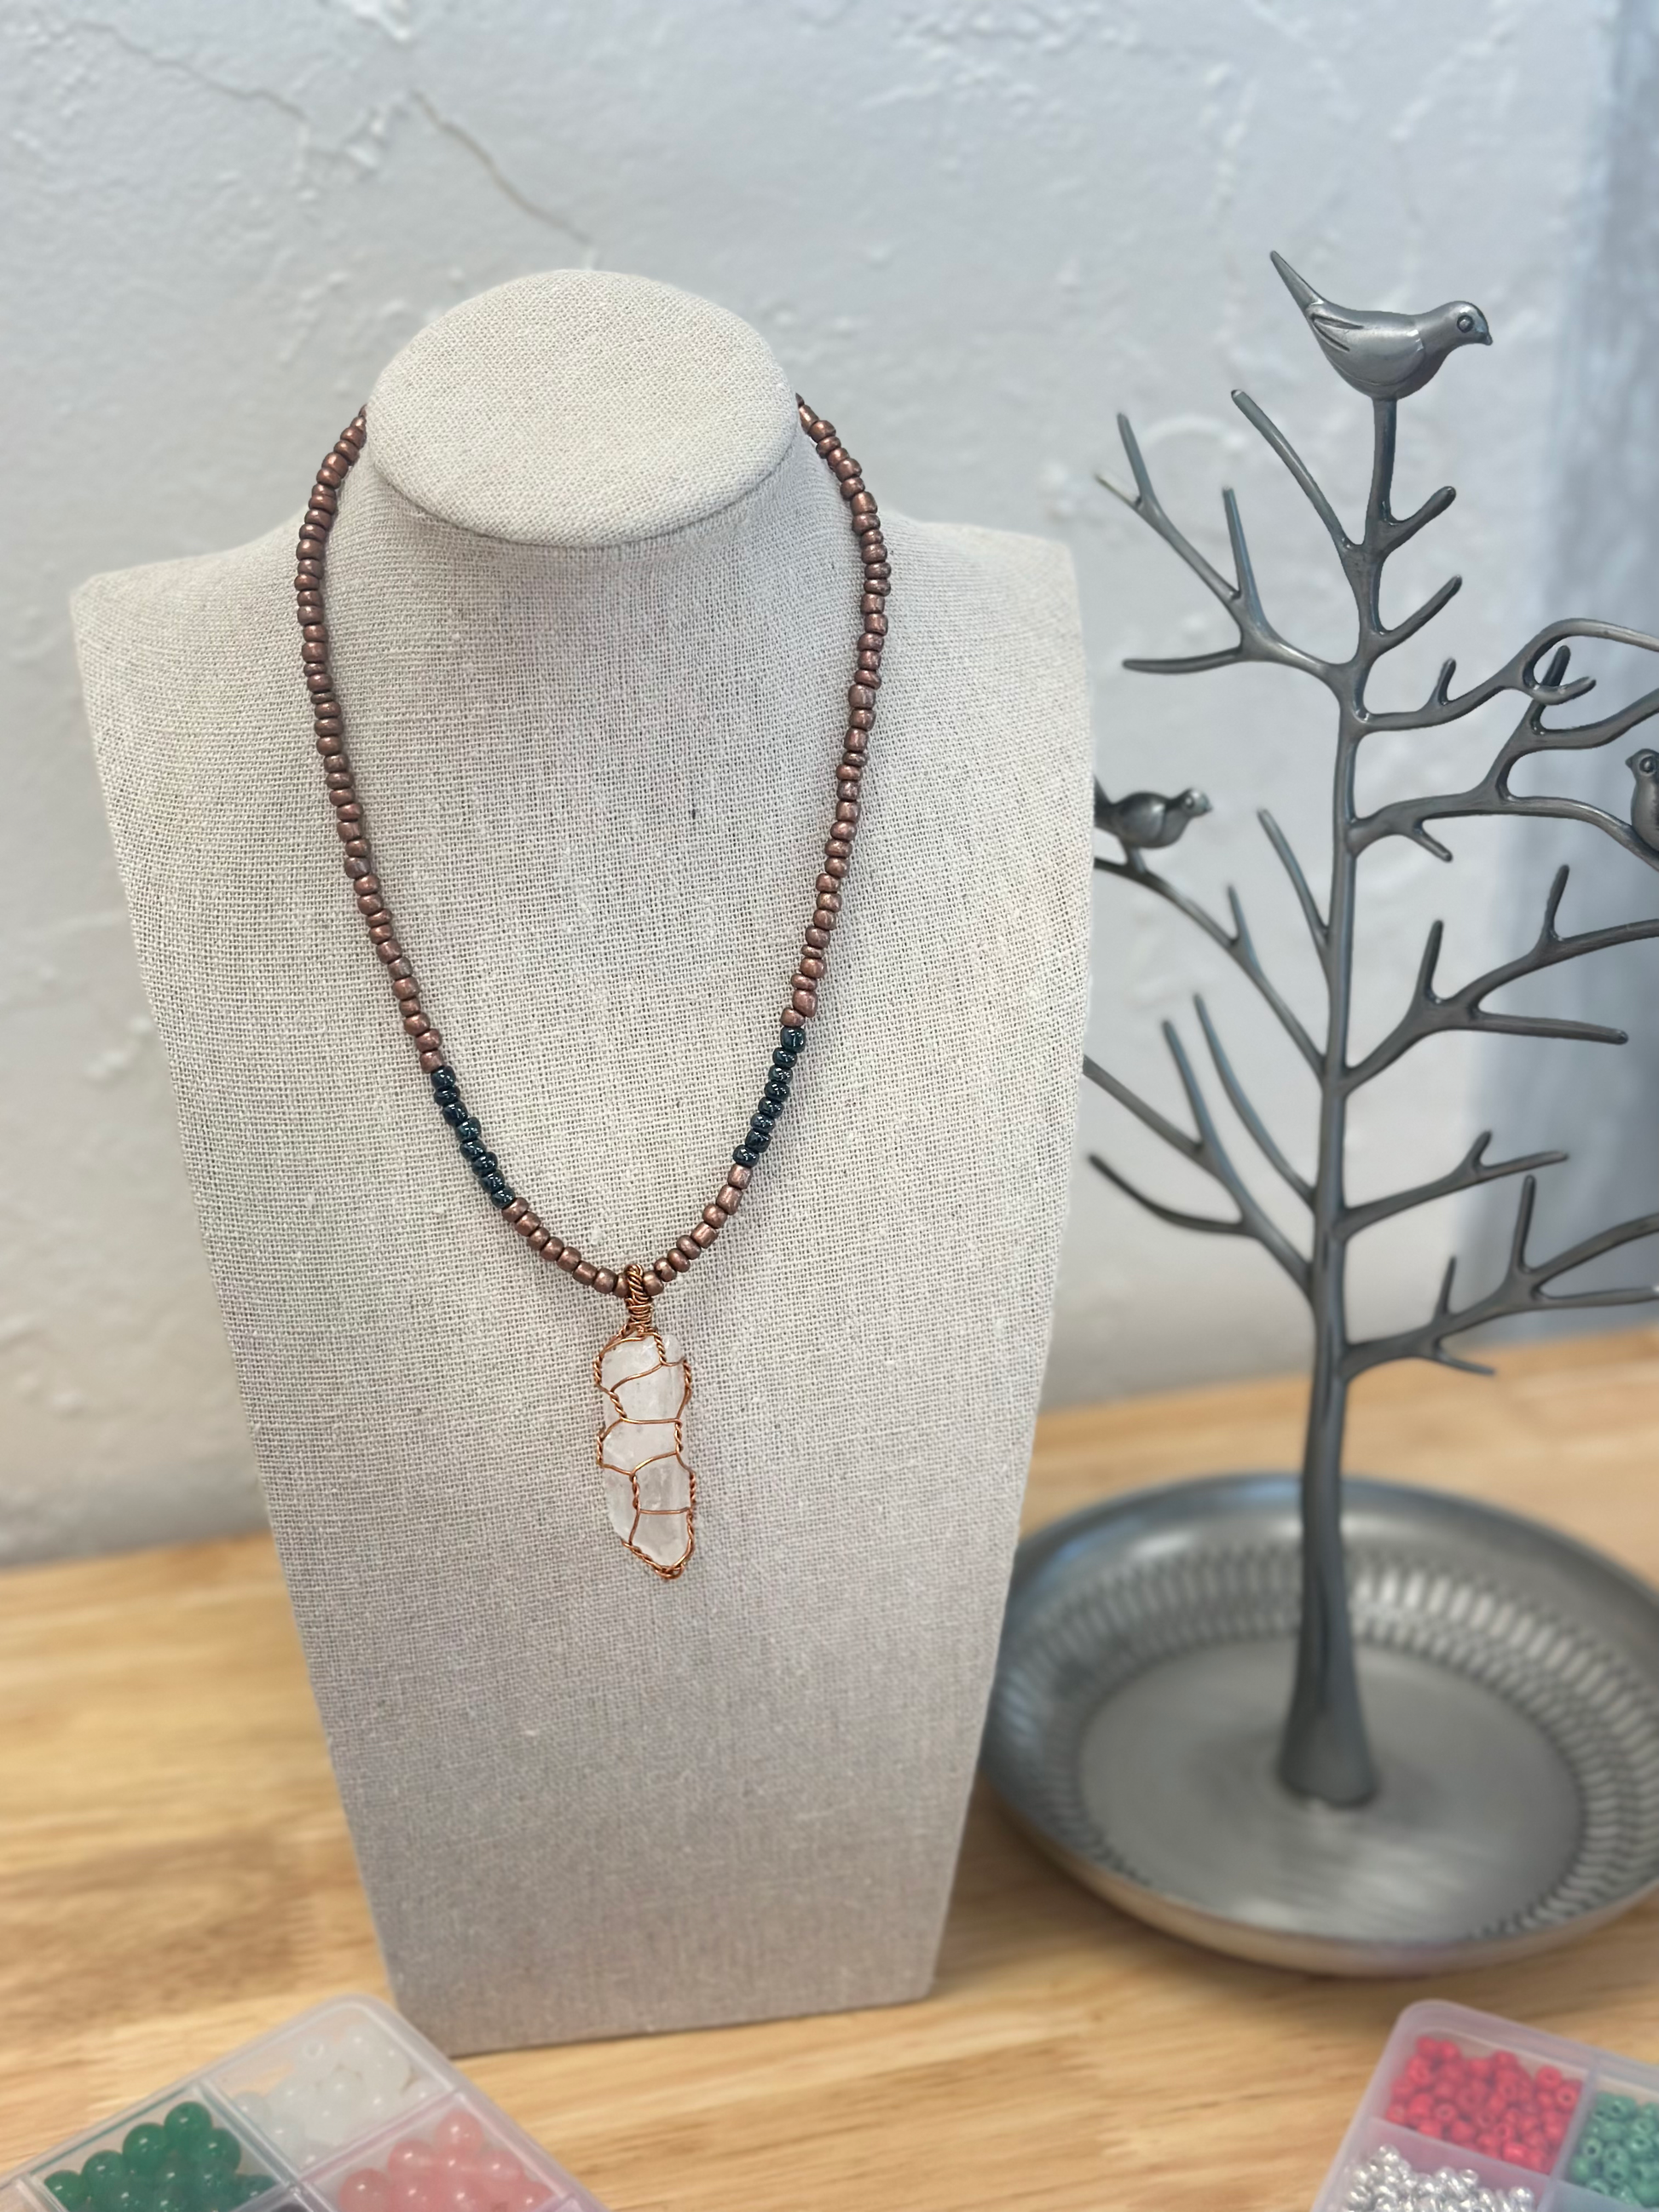 Beaded necklace with wire-wrapped crystal pendant